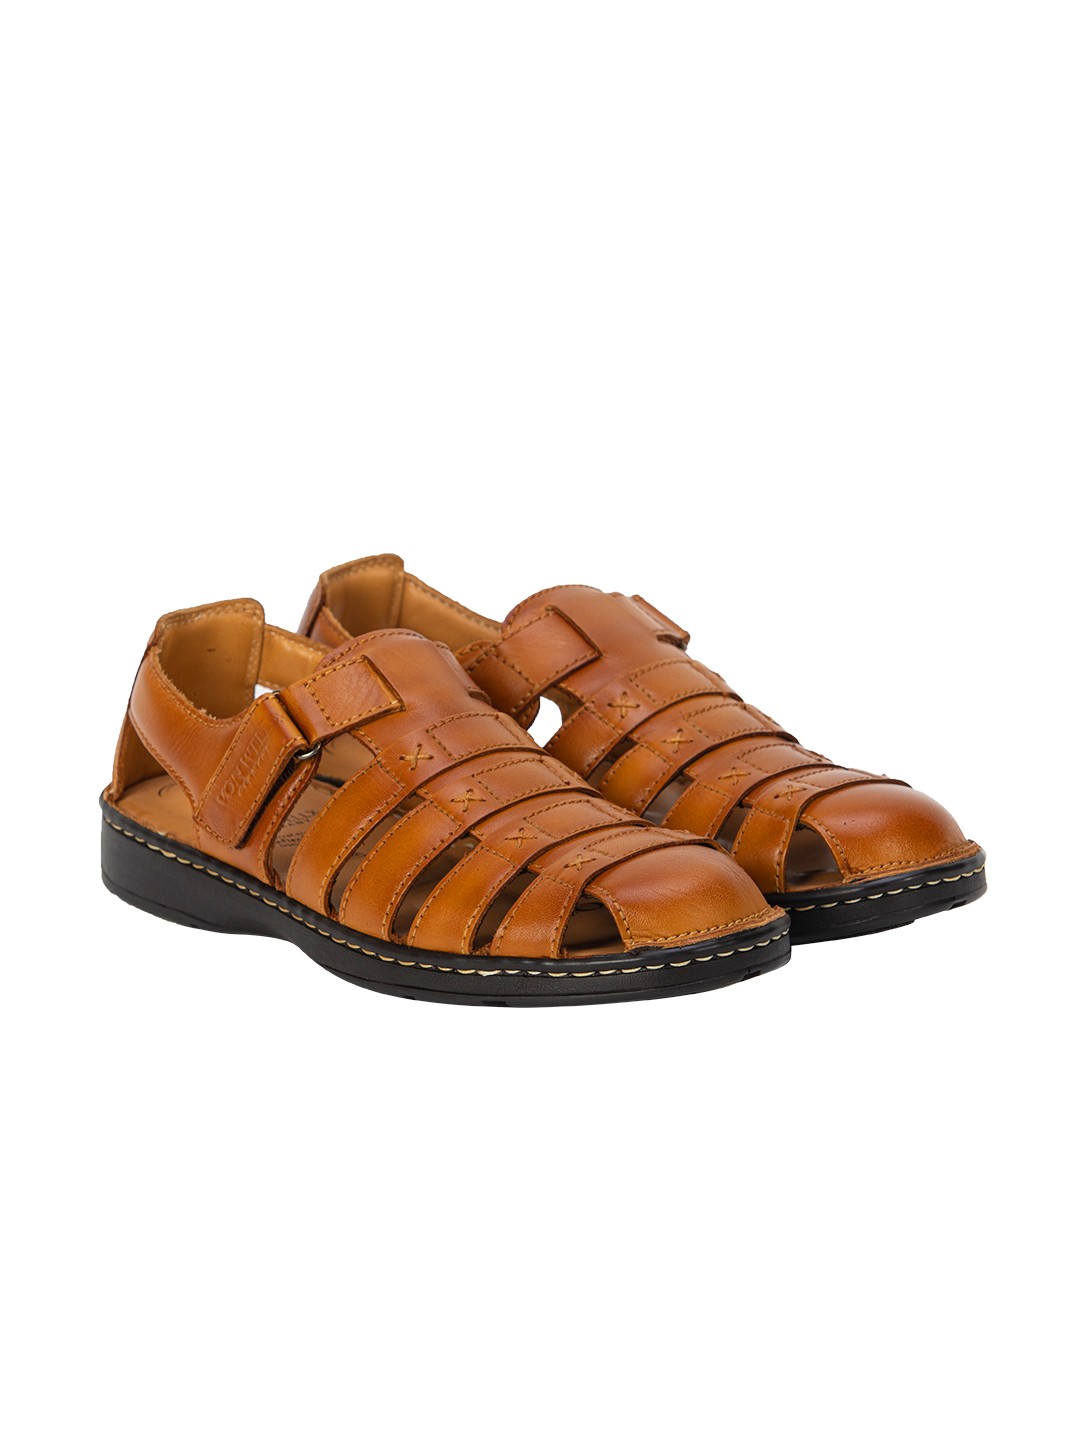 Buy Regal Men's Black Leather Comfort Sandals Online at Lowest Price Ever  in India | Check Reviews & Ratings - Shop The World